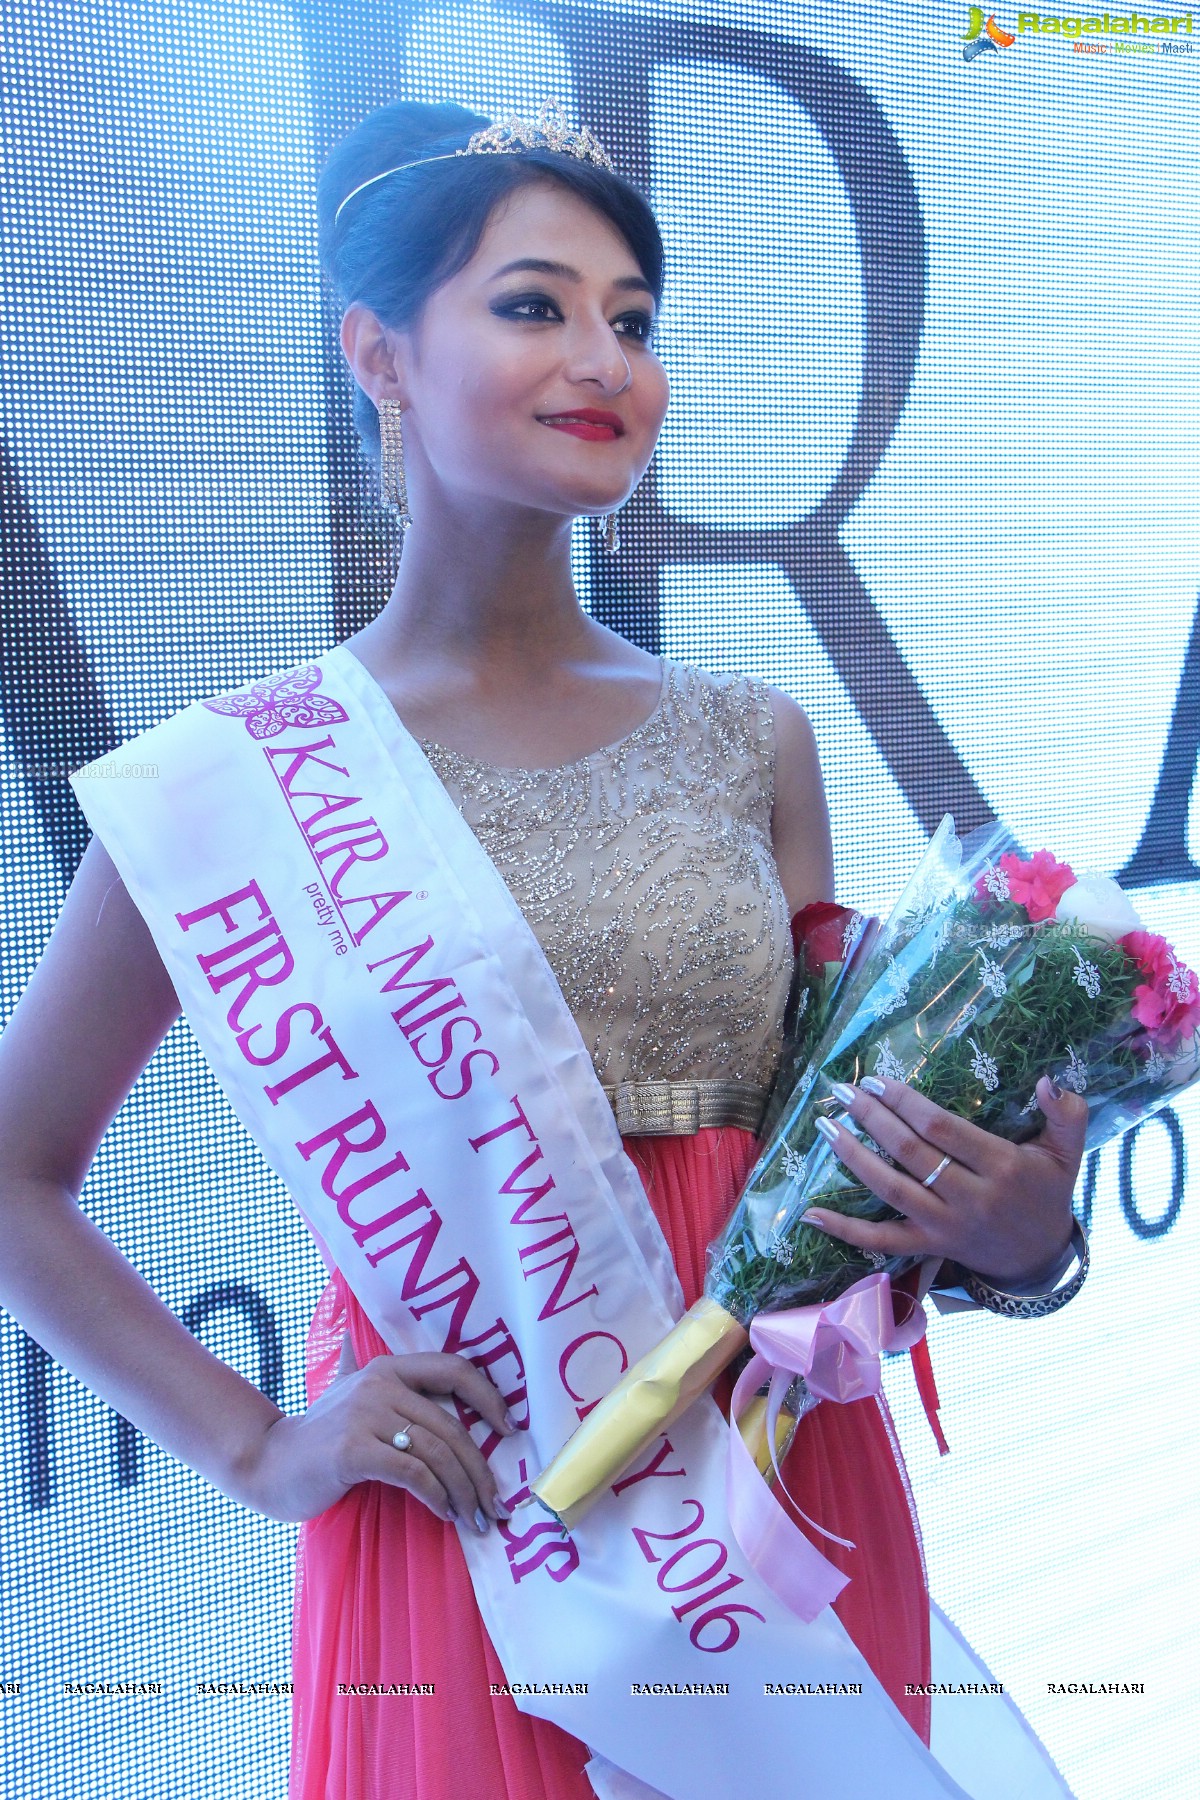 Grand Finale of Miss Twin City-2016